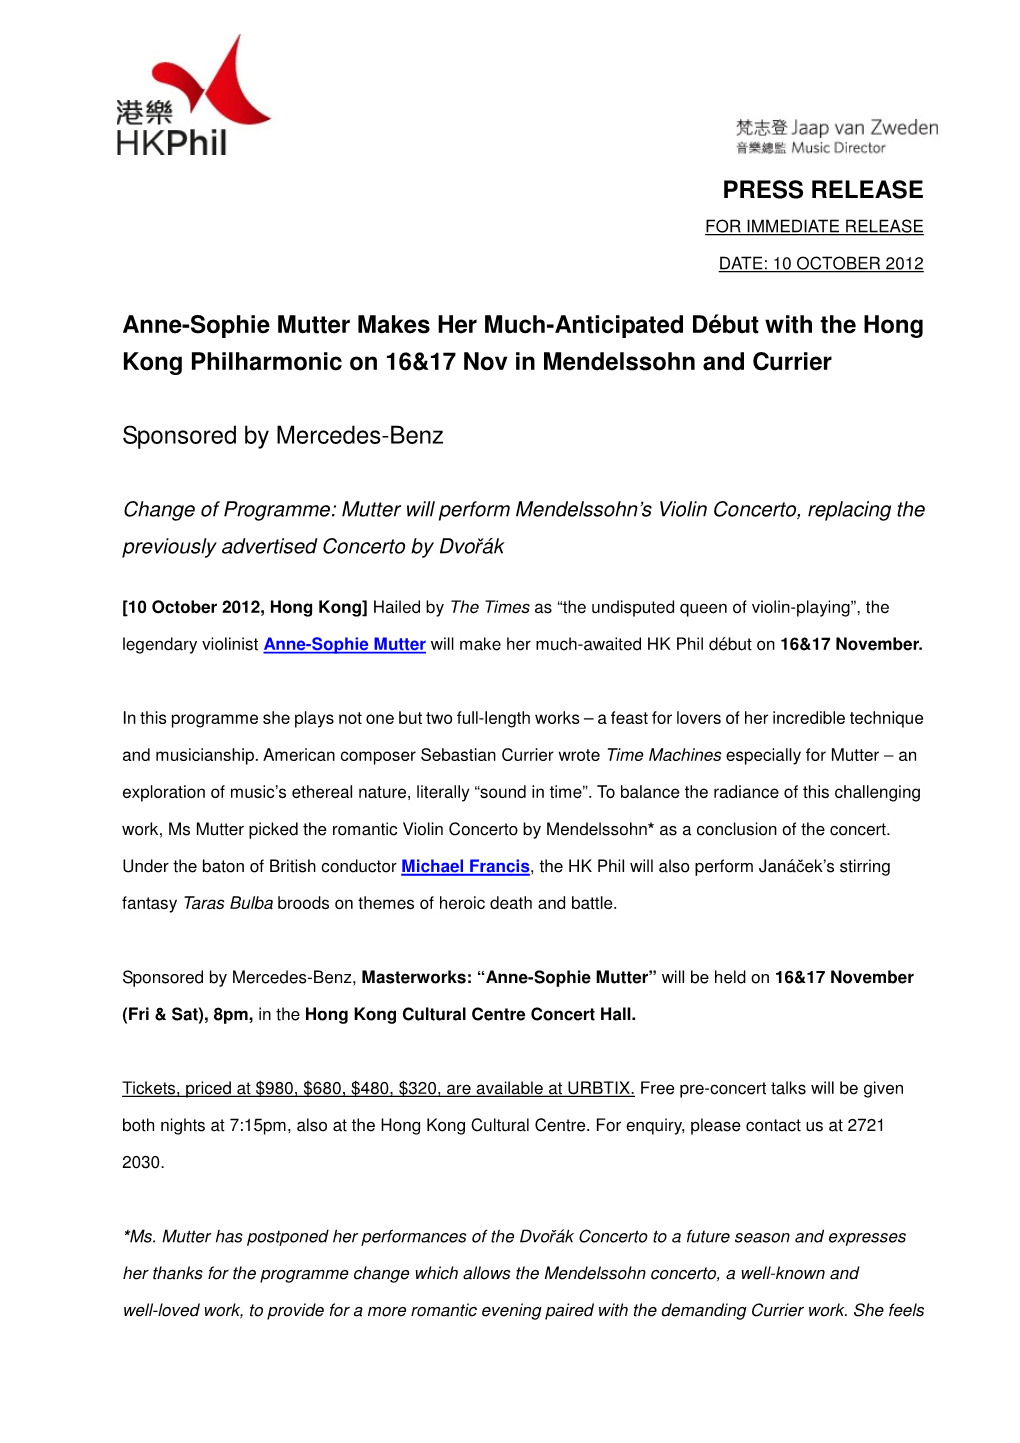 PRESS RELEASE Anne-Sophie Mutter Makes Her Much-Anticipated